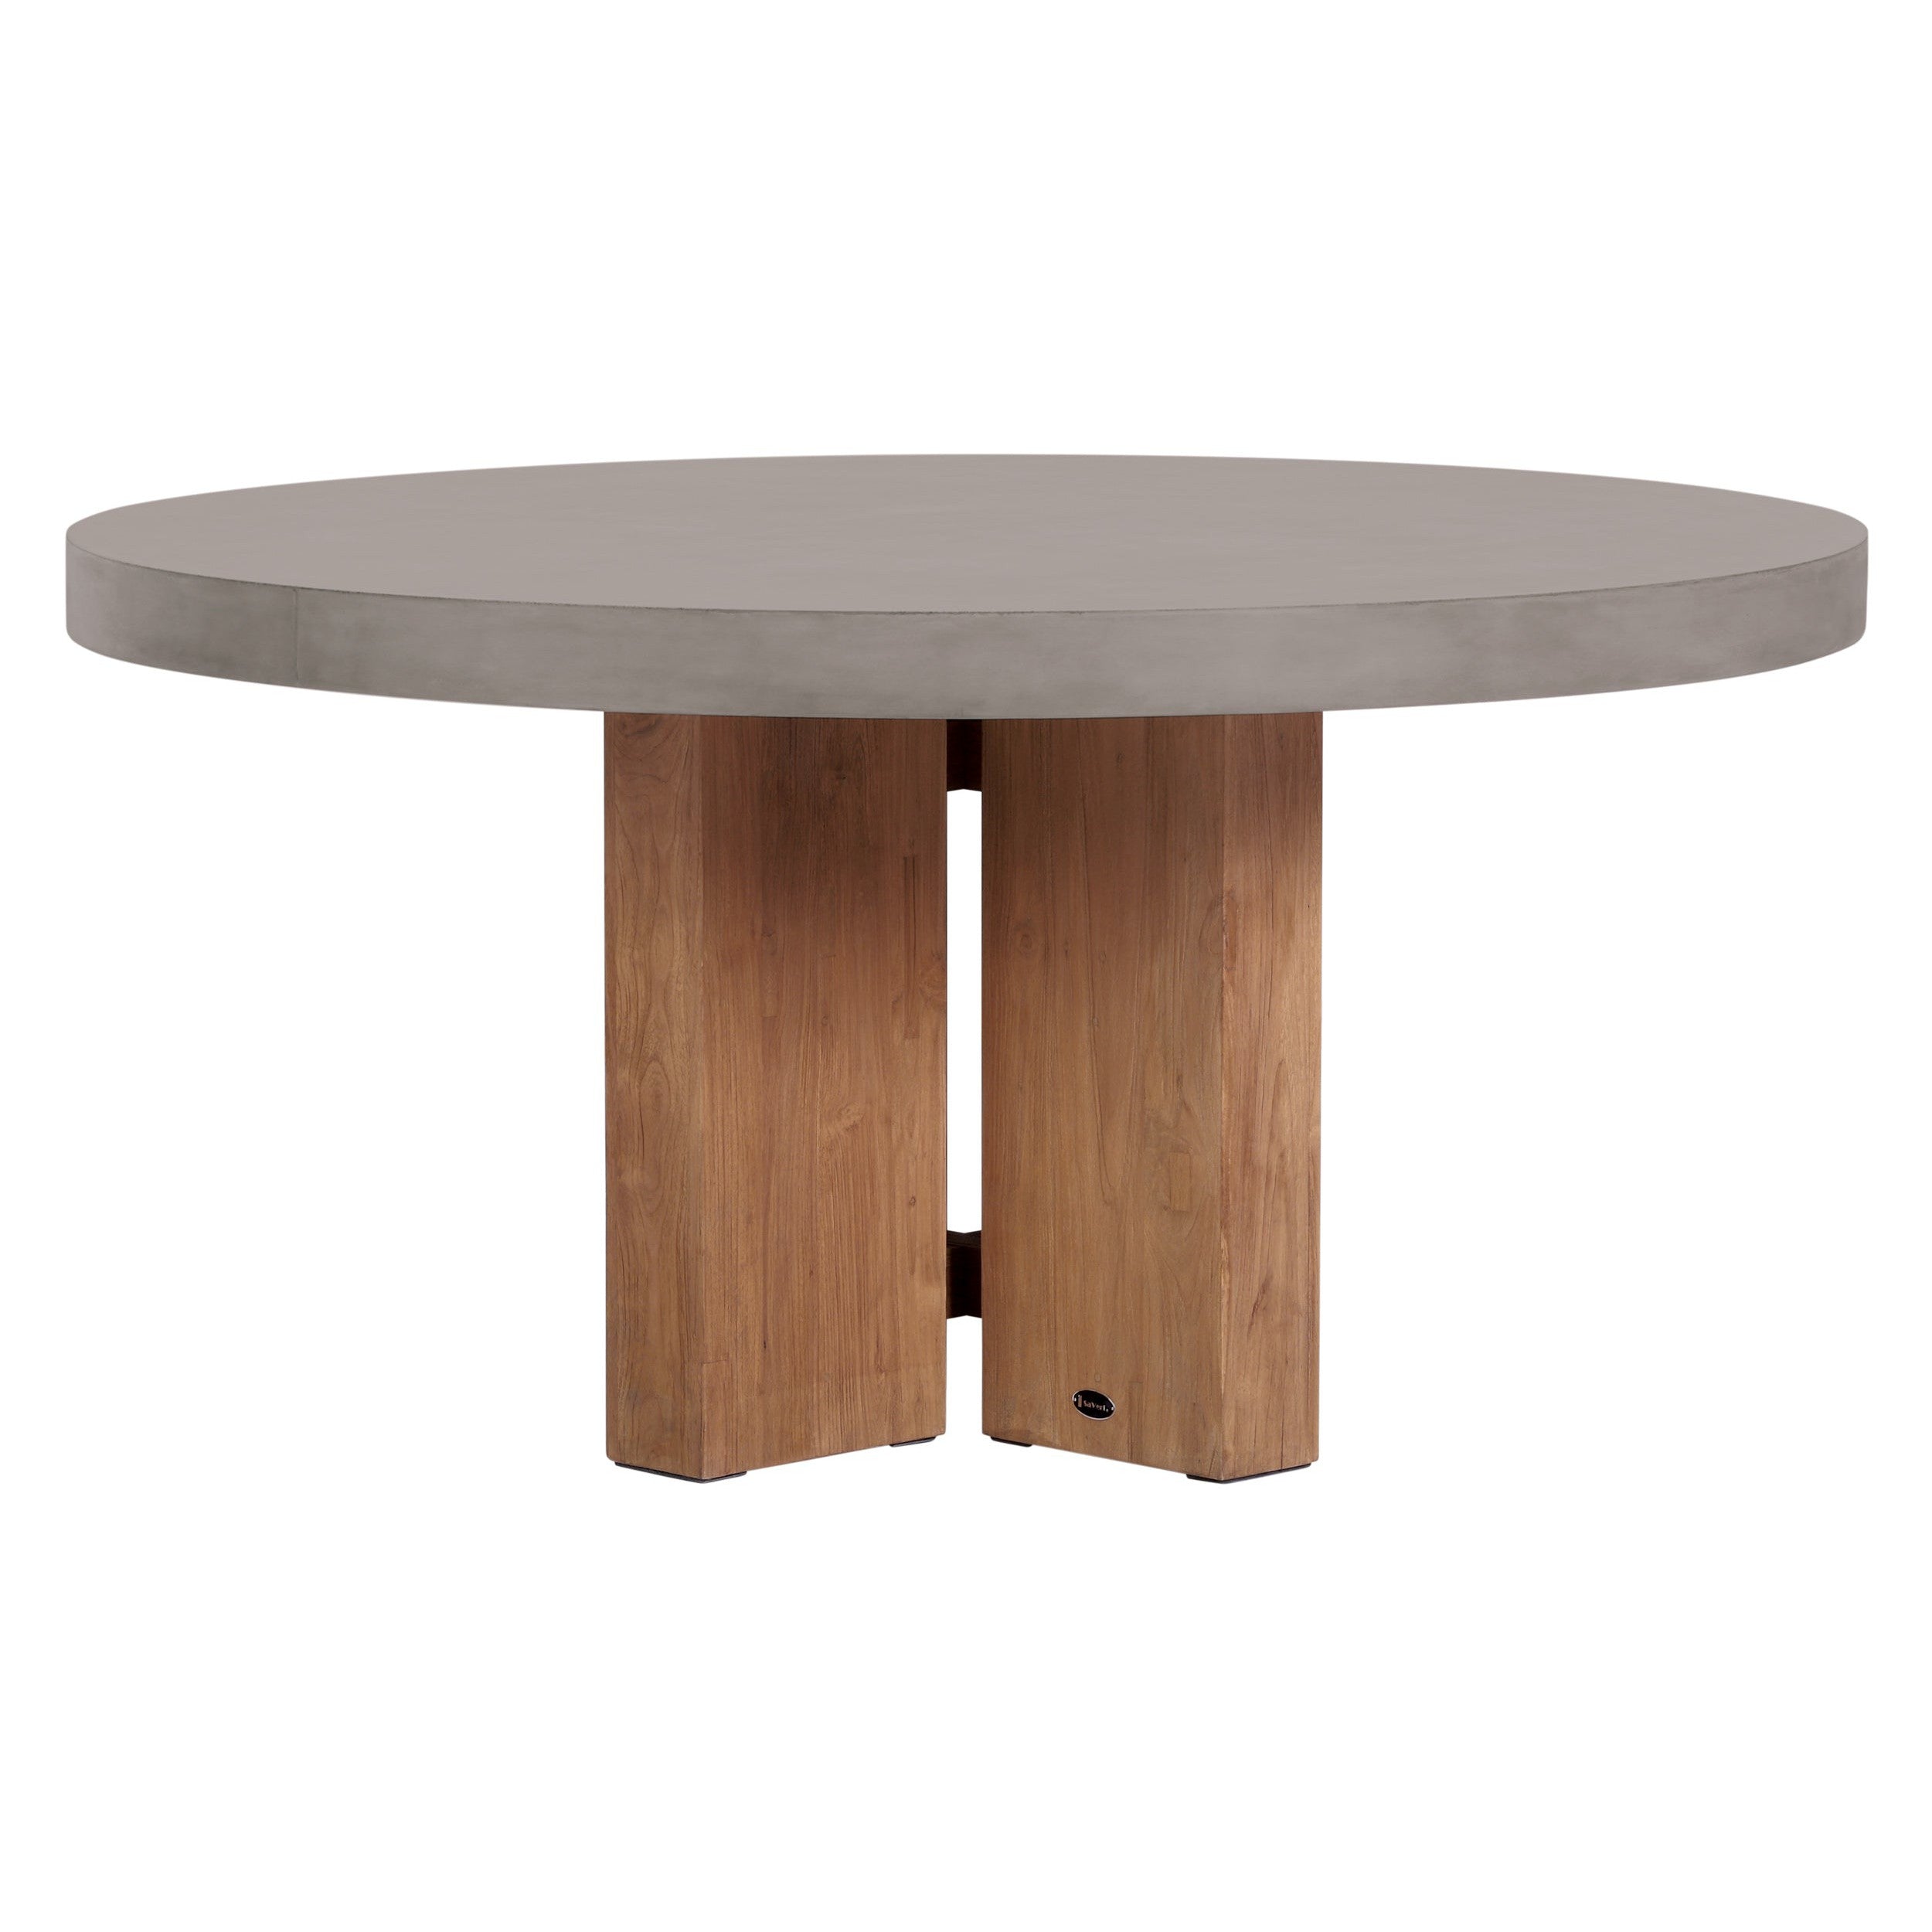 Java Teak and Concrete Dining Table - Slate Gray Outdoor Dining Table